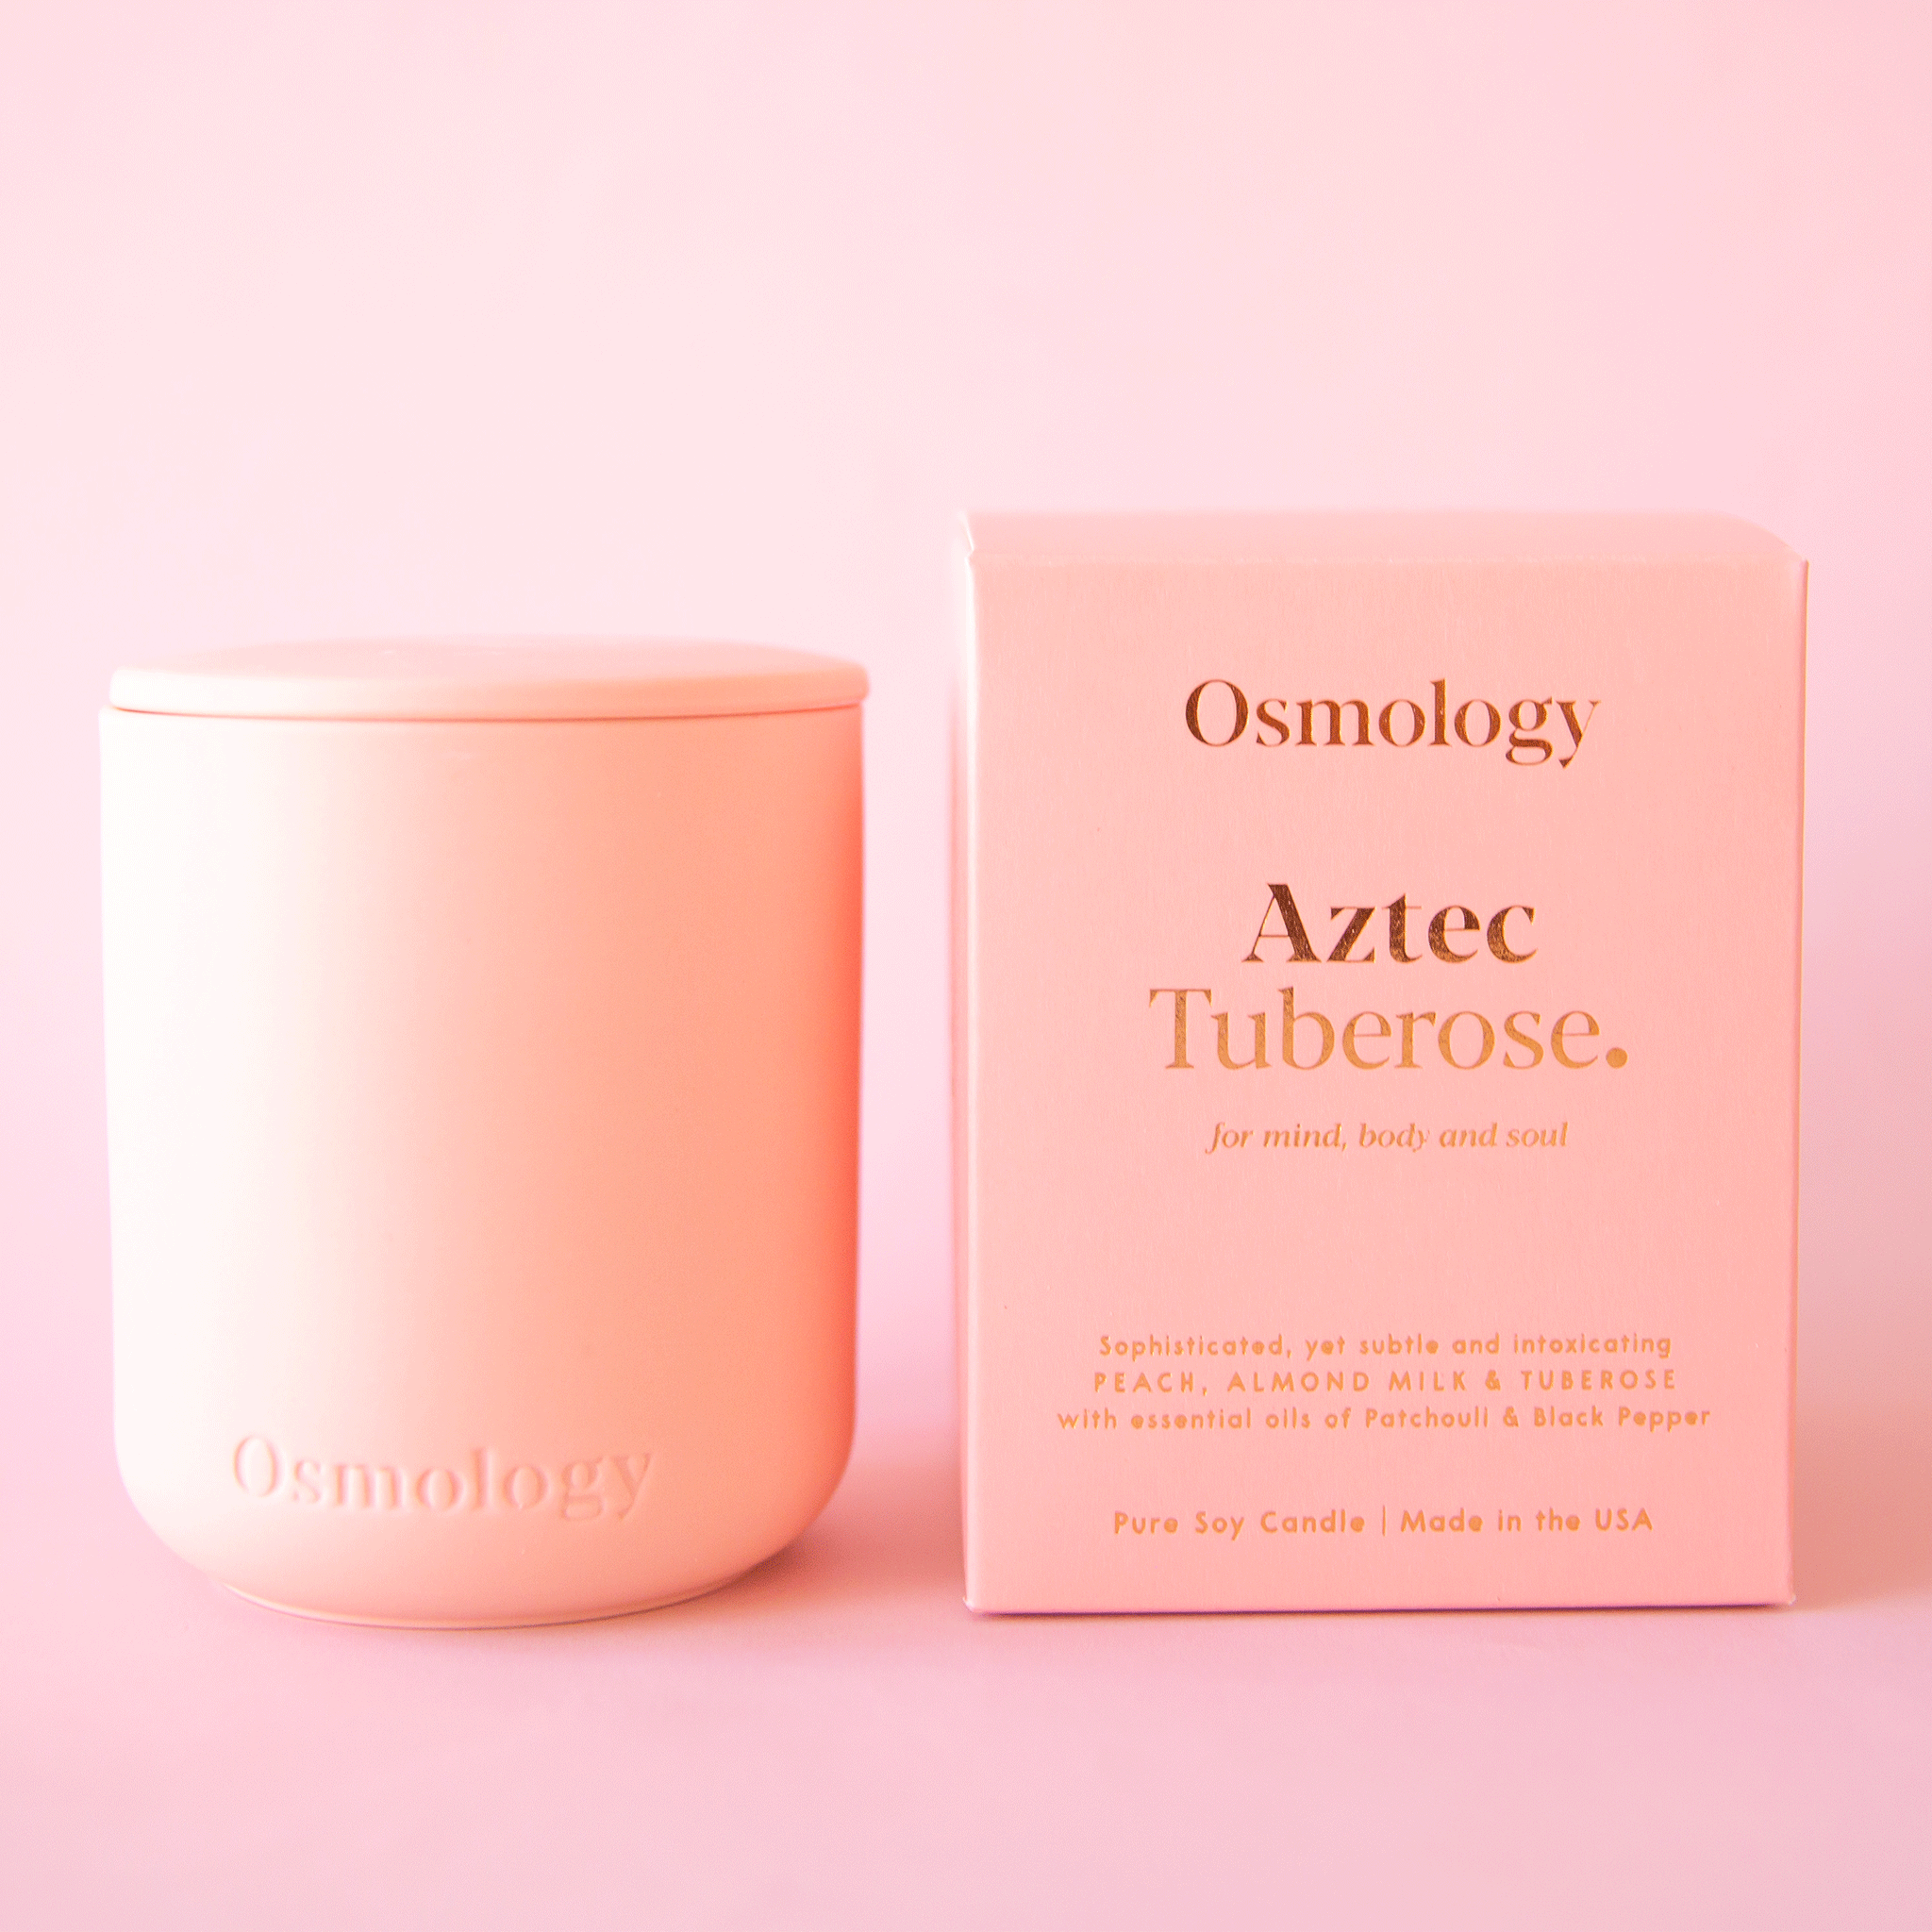 On a pink background is a peach clay candle with a lid sitting next to the peachy box that it comes in. The front of the box reads, "Osmology Aztec Tuberose.".